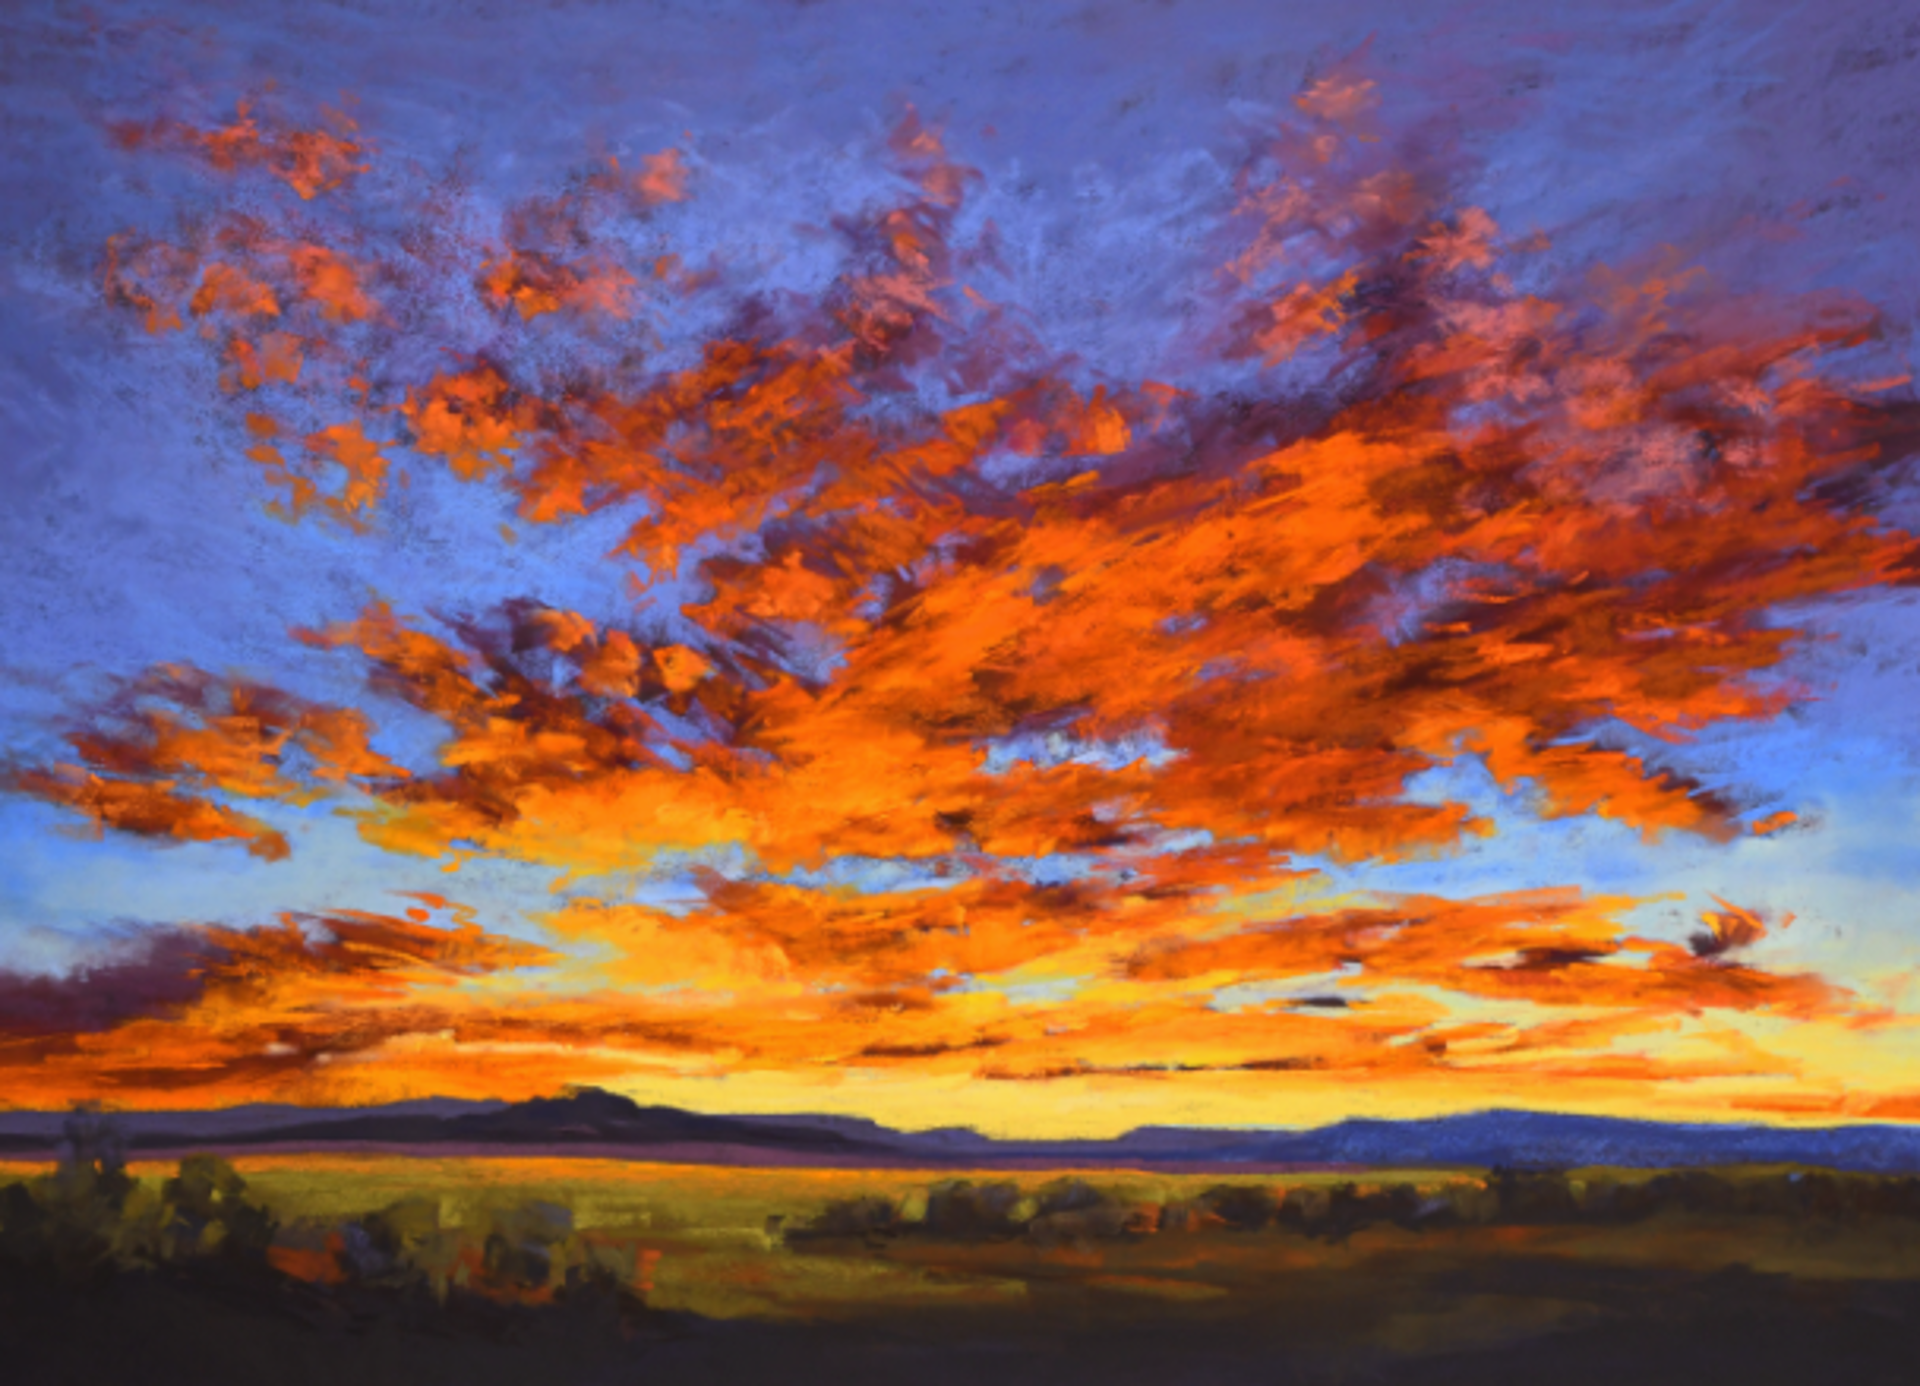 Promise of a new day (28" x 36" framed) by Tobi Clement